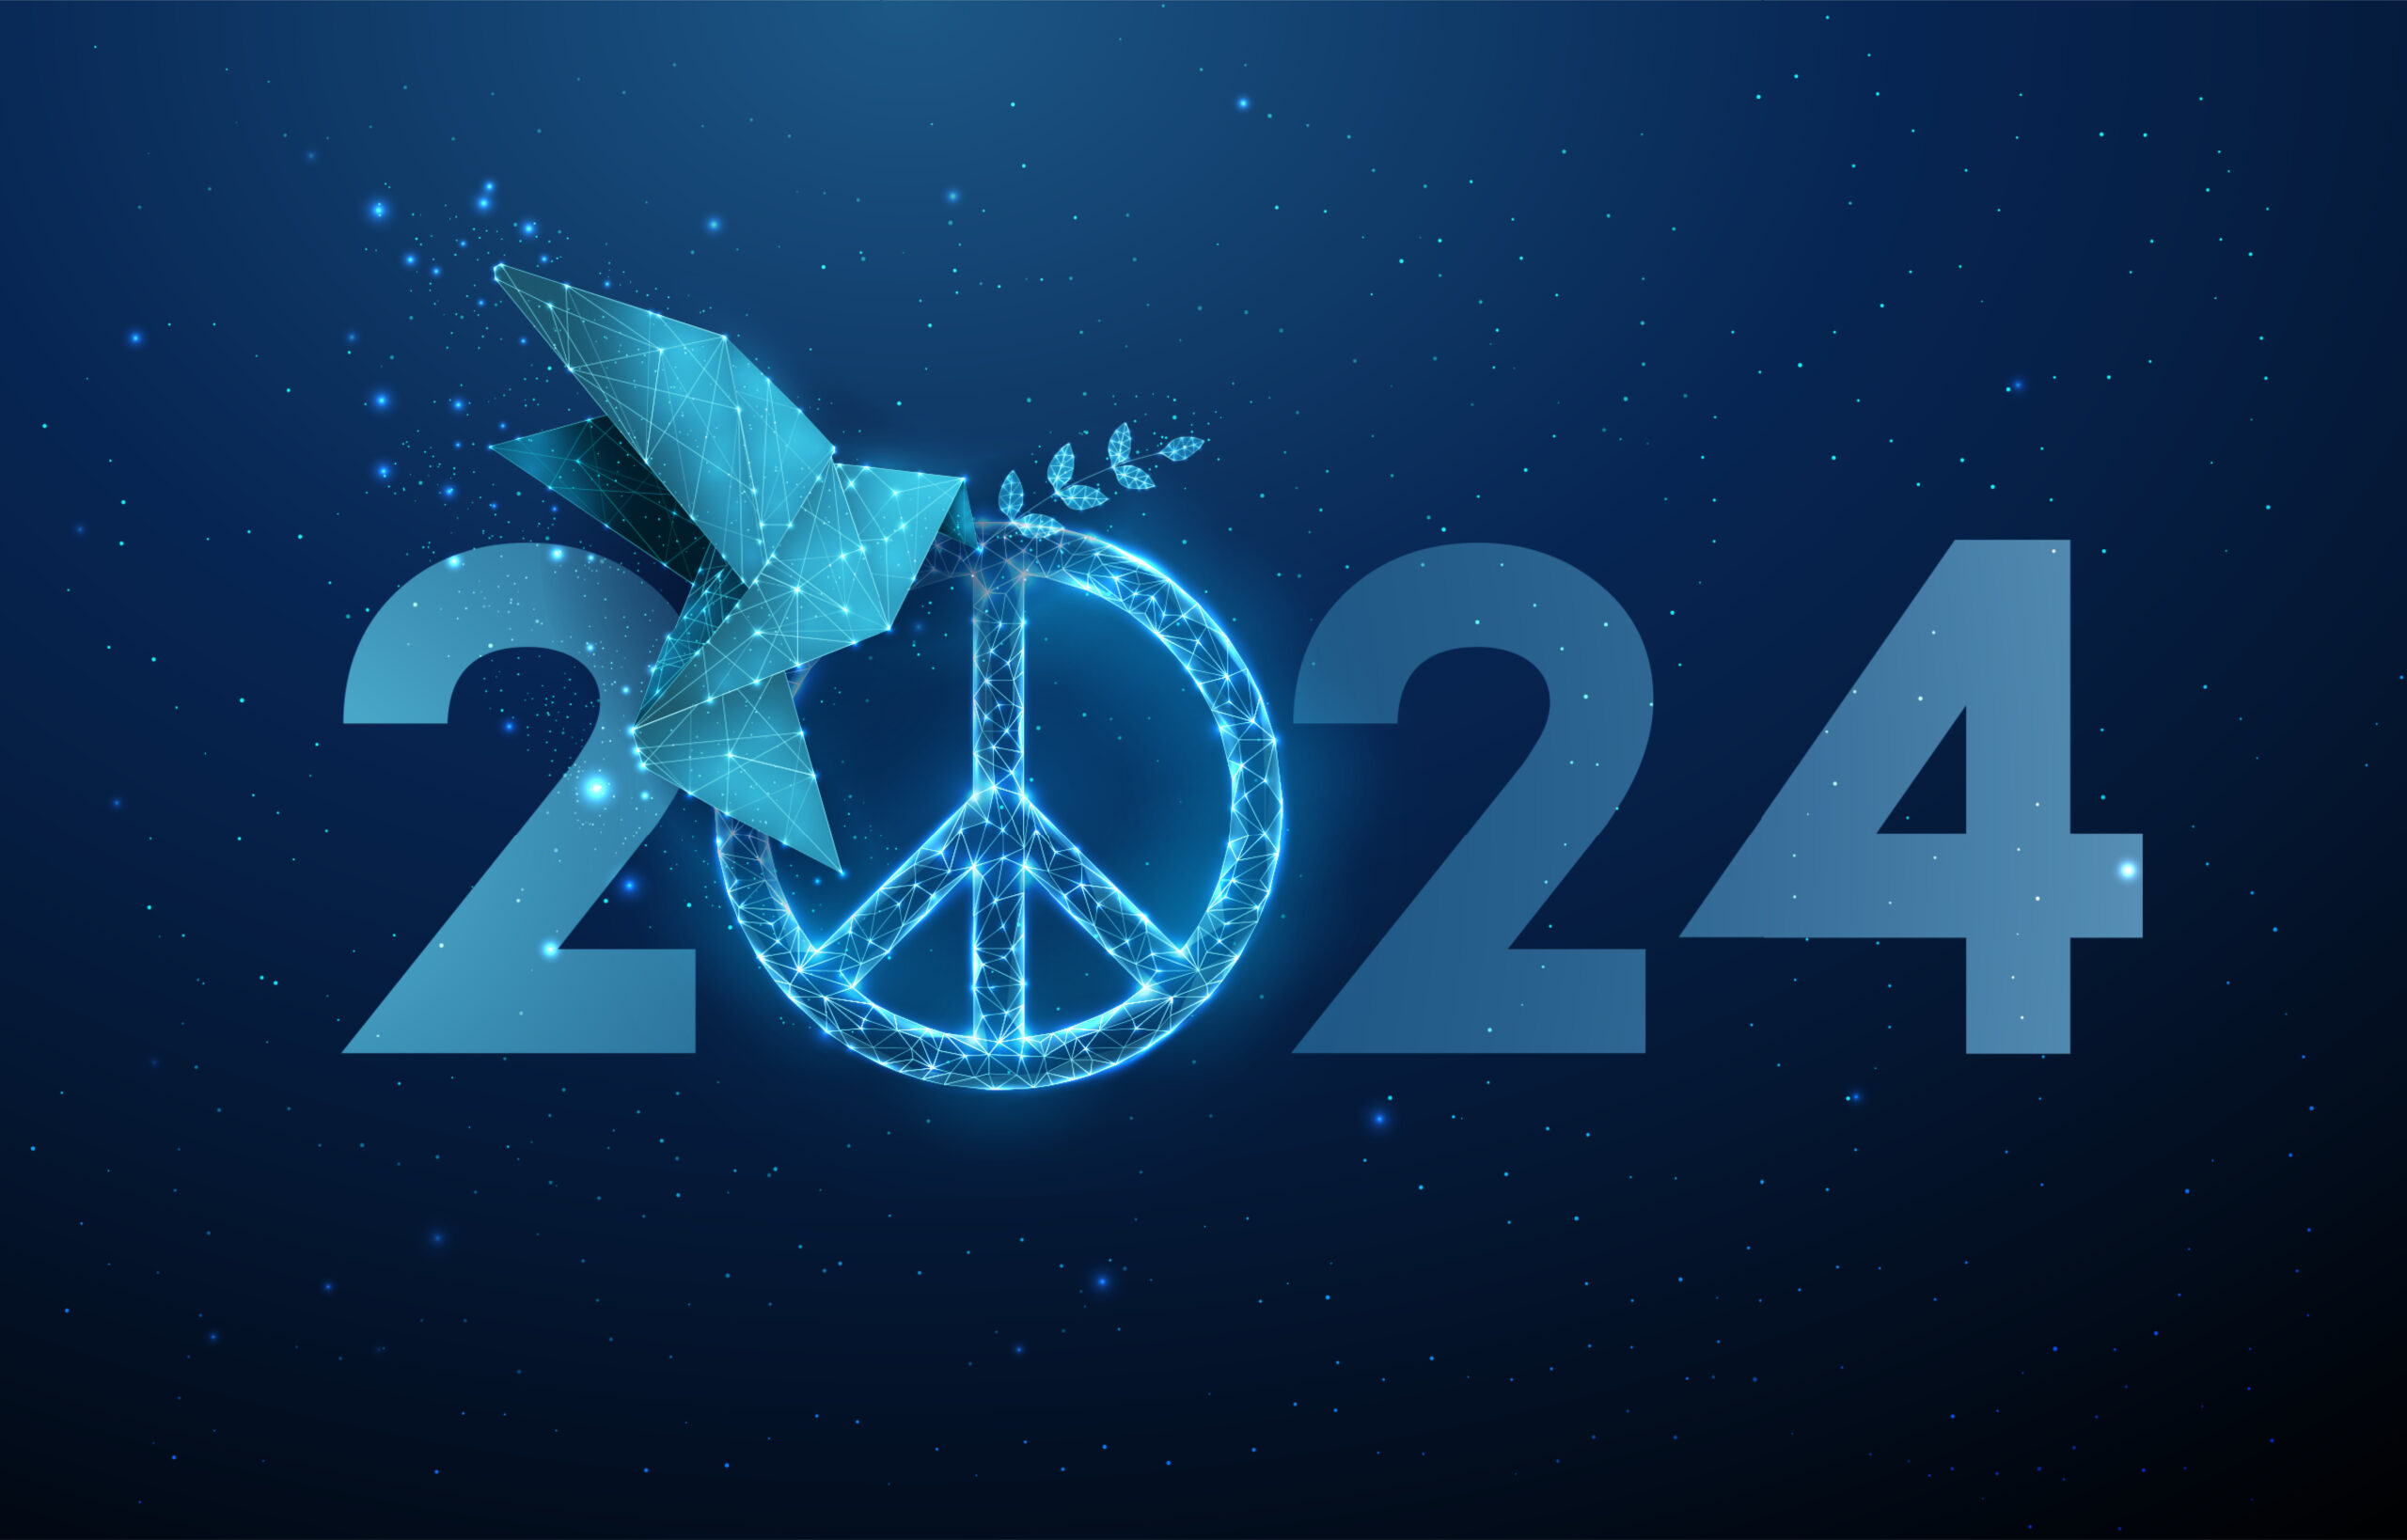 Abstract 2024 image with origami bird with olive branch and peace sign on blue background